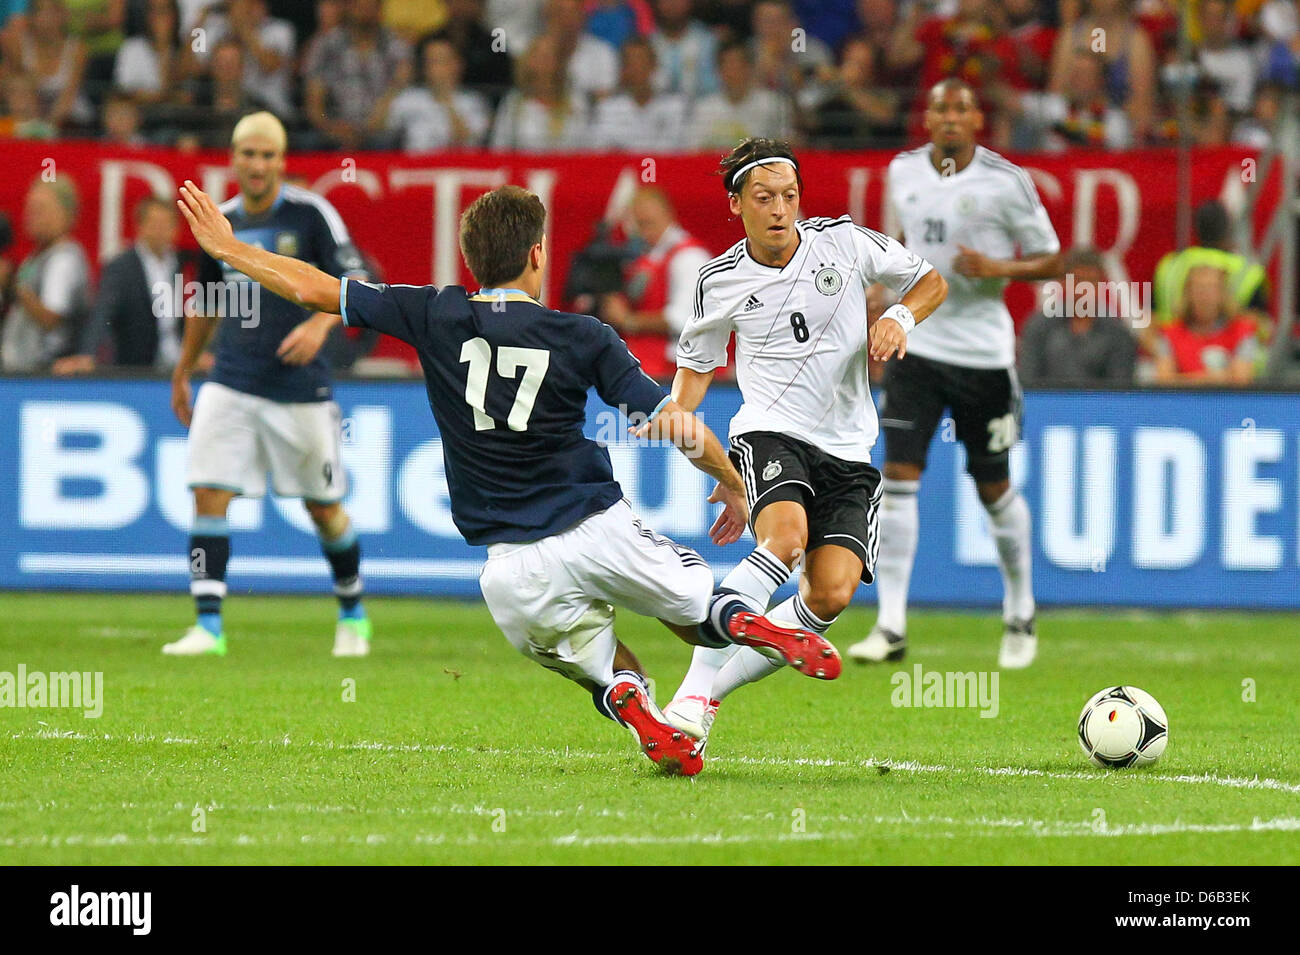 Germany's Mesut Ozil (R) vies for the ball with Argentina's Federico Fernandez during the friendly soccer match between Germany and Argentina at the Commerzbank-Arena in Frankfurt/Main, Germany, 15 August 2012. Photo: Revierfoto Stock Photo